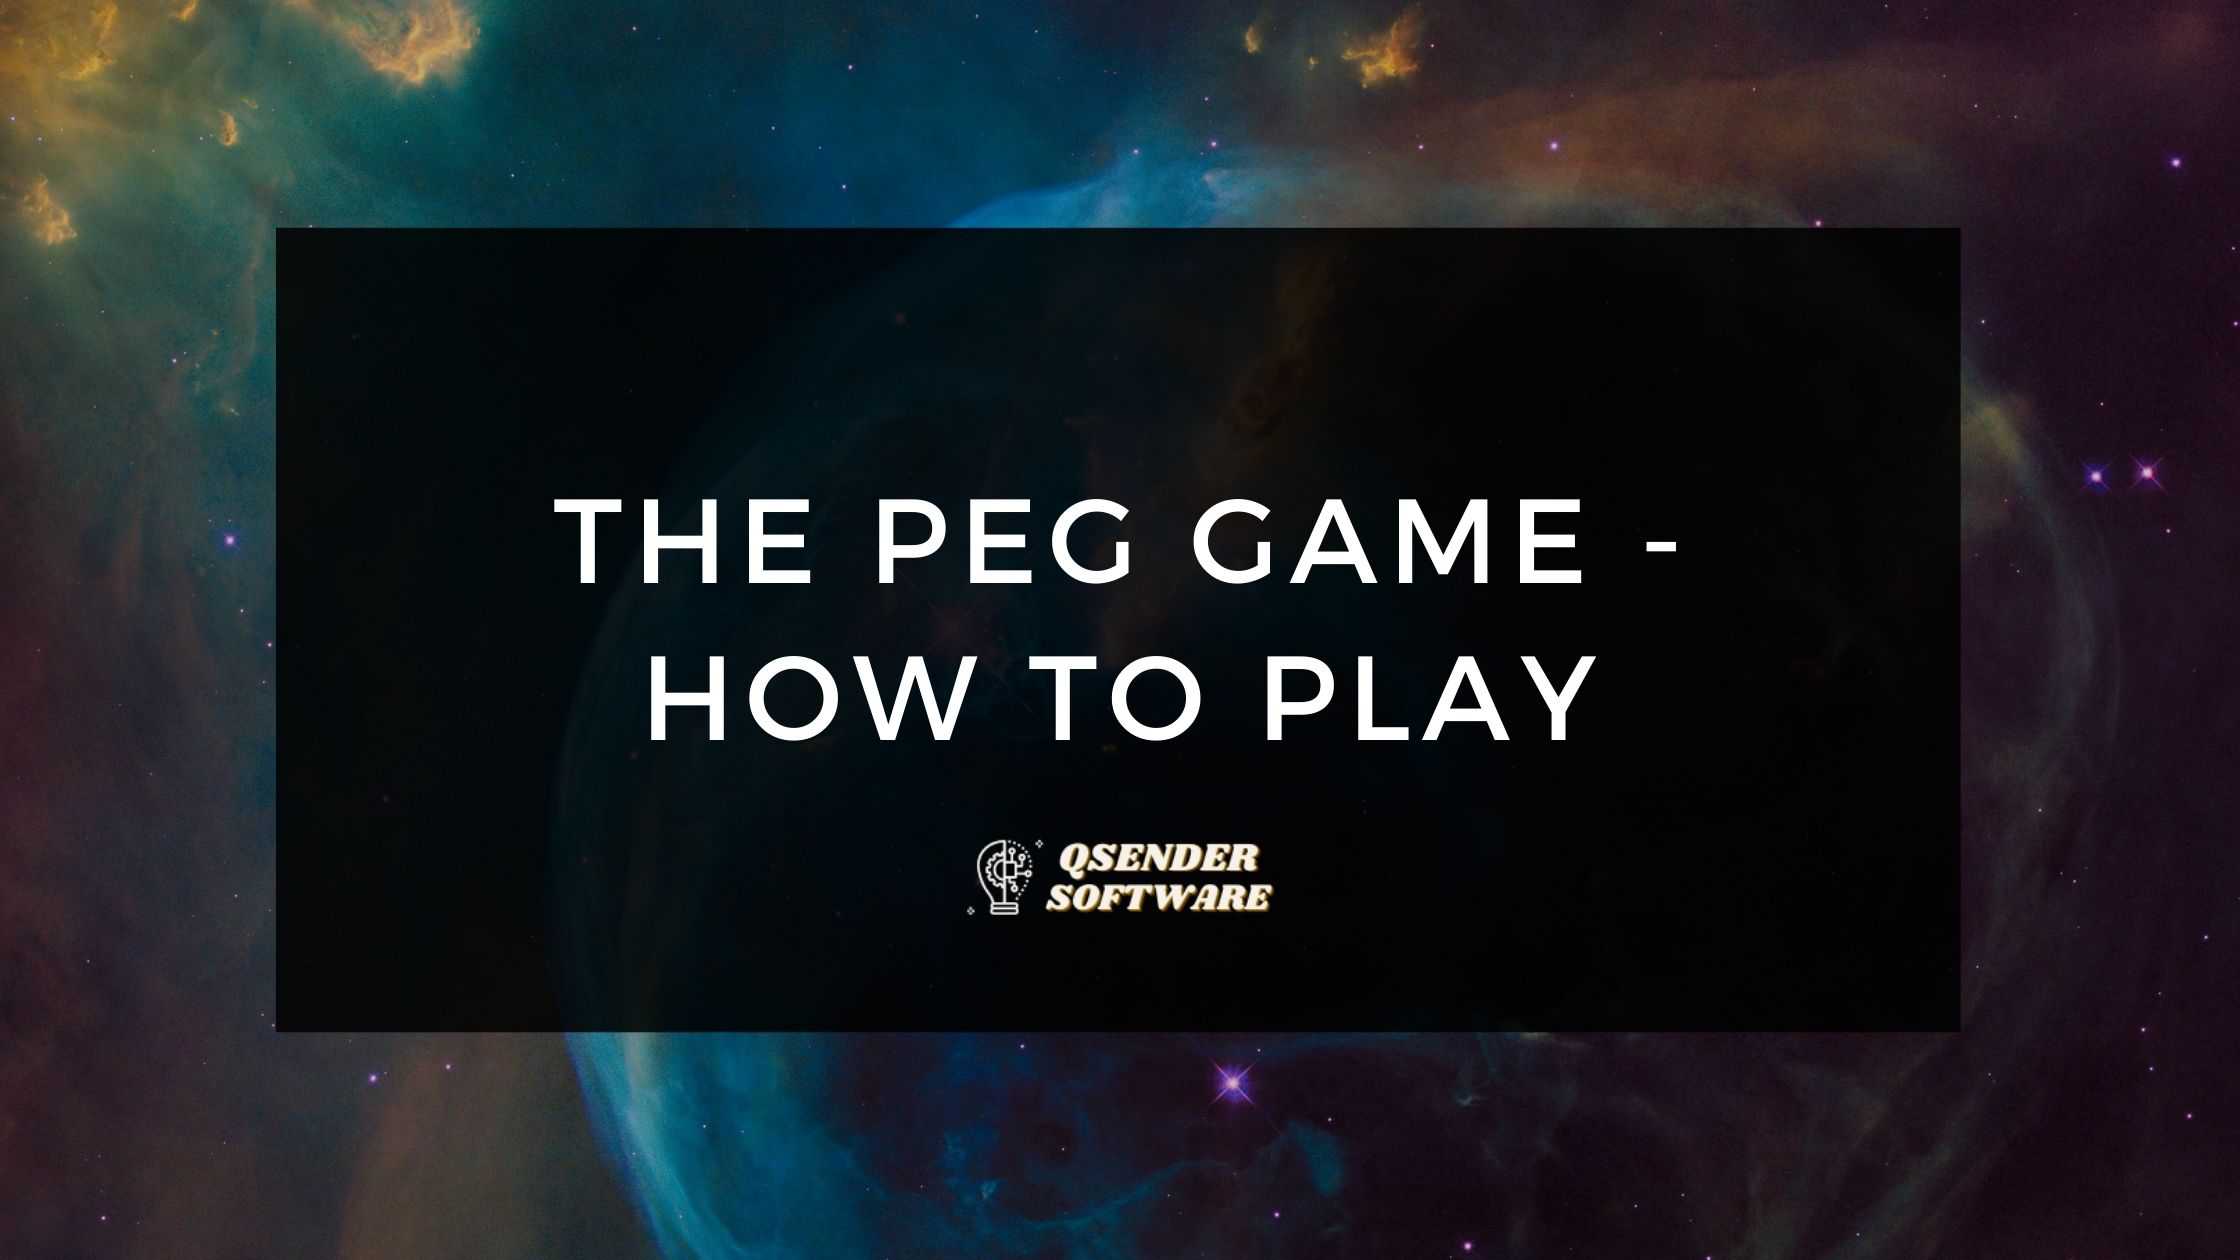 The Peg Game